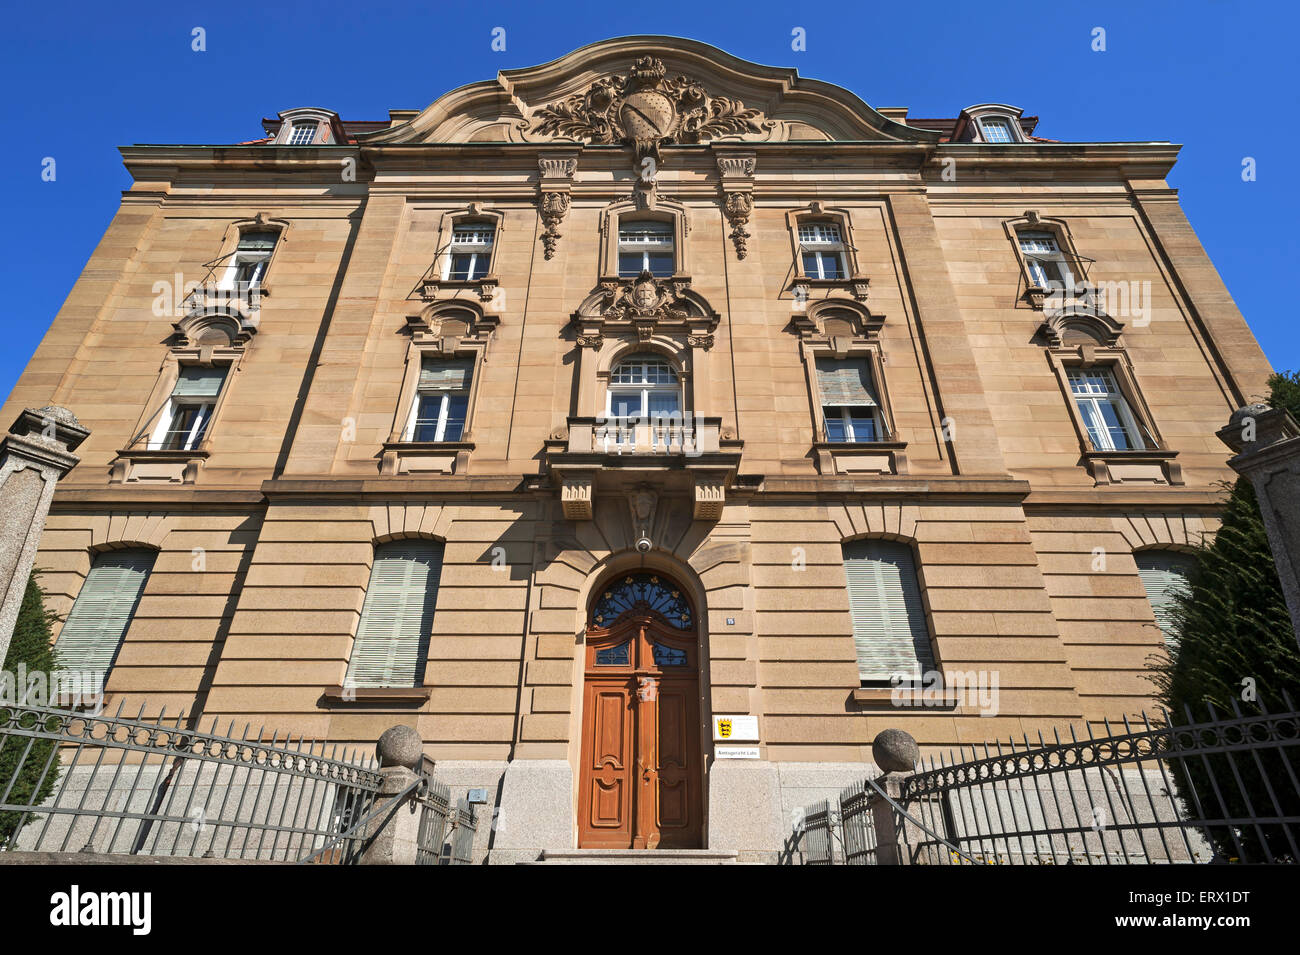 District Court, built from 1899 to 1902, Lahr, Baden-Württemberg, Germany Stock Photo